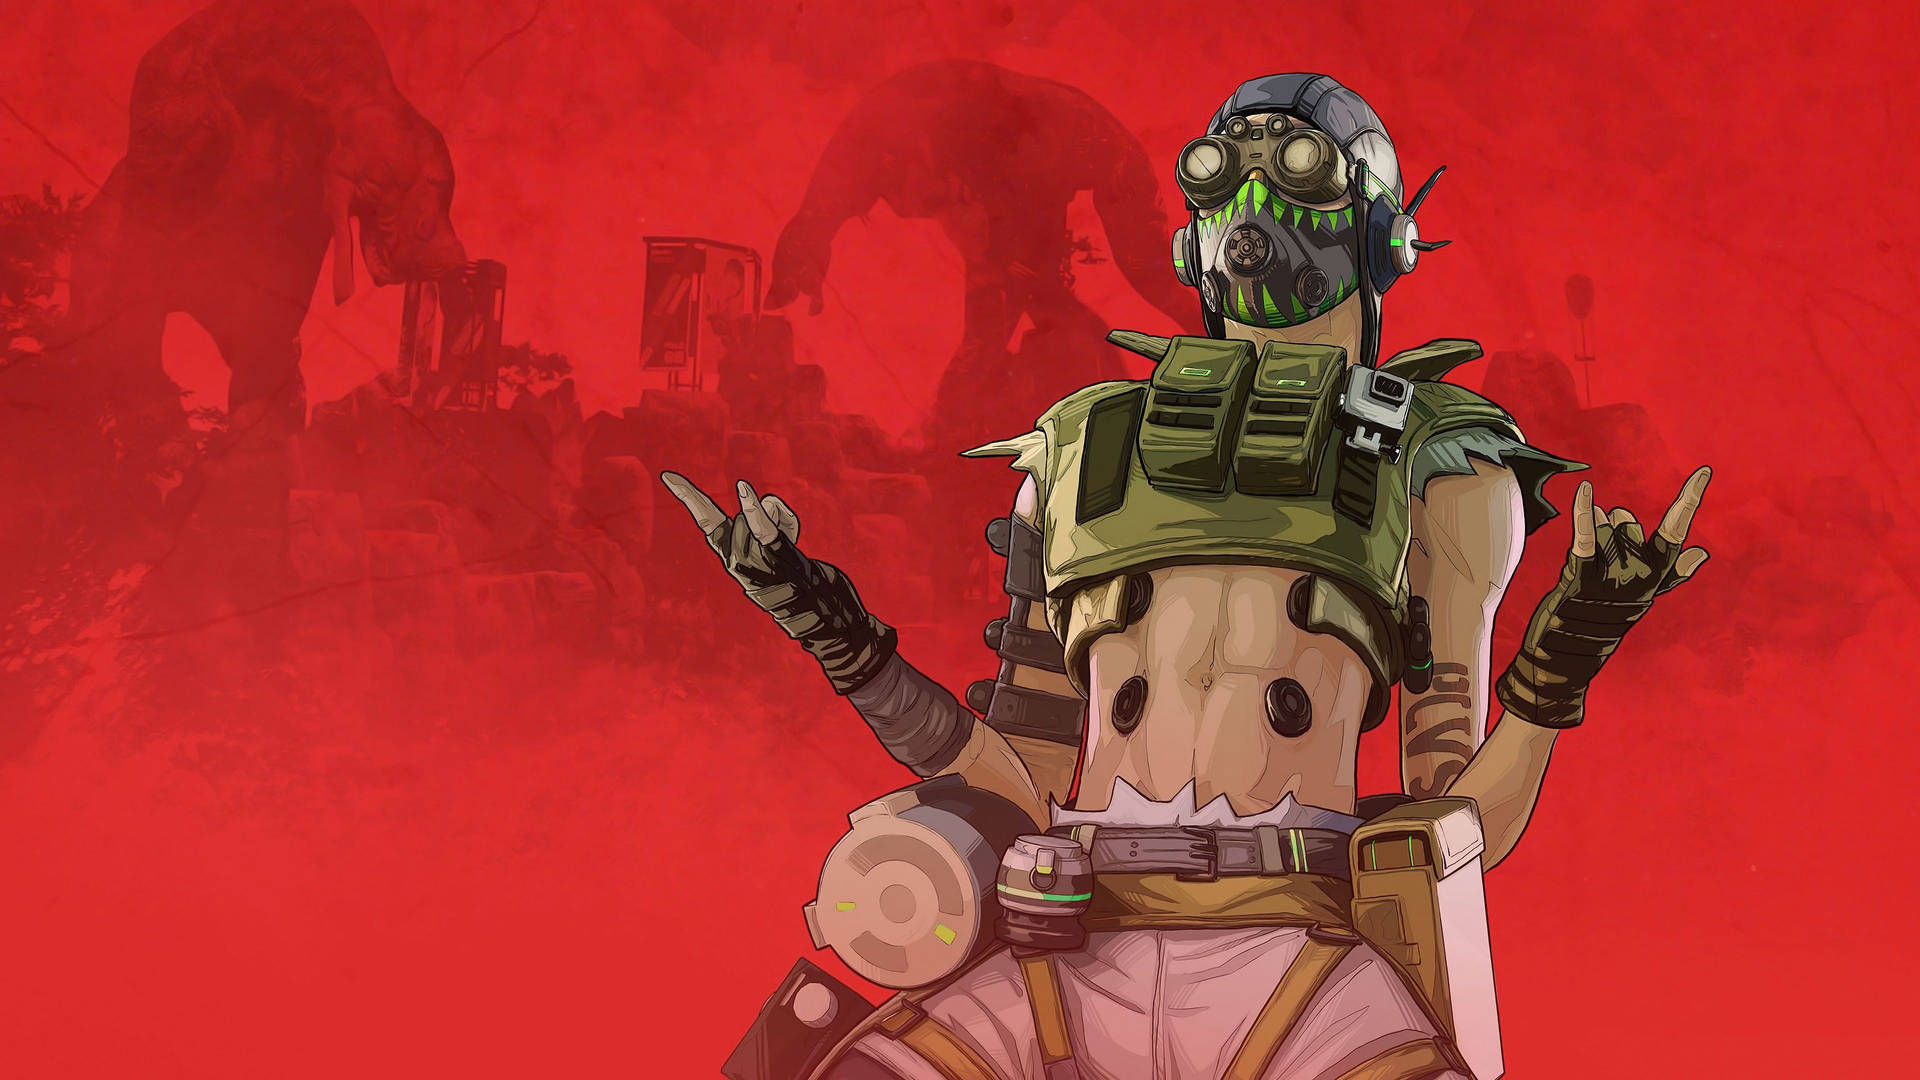 "Unlock your full potential with Cool Apex Legends!" Wallpaper